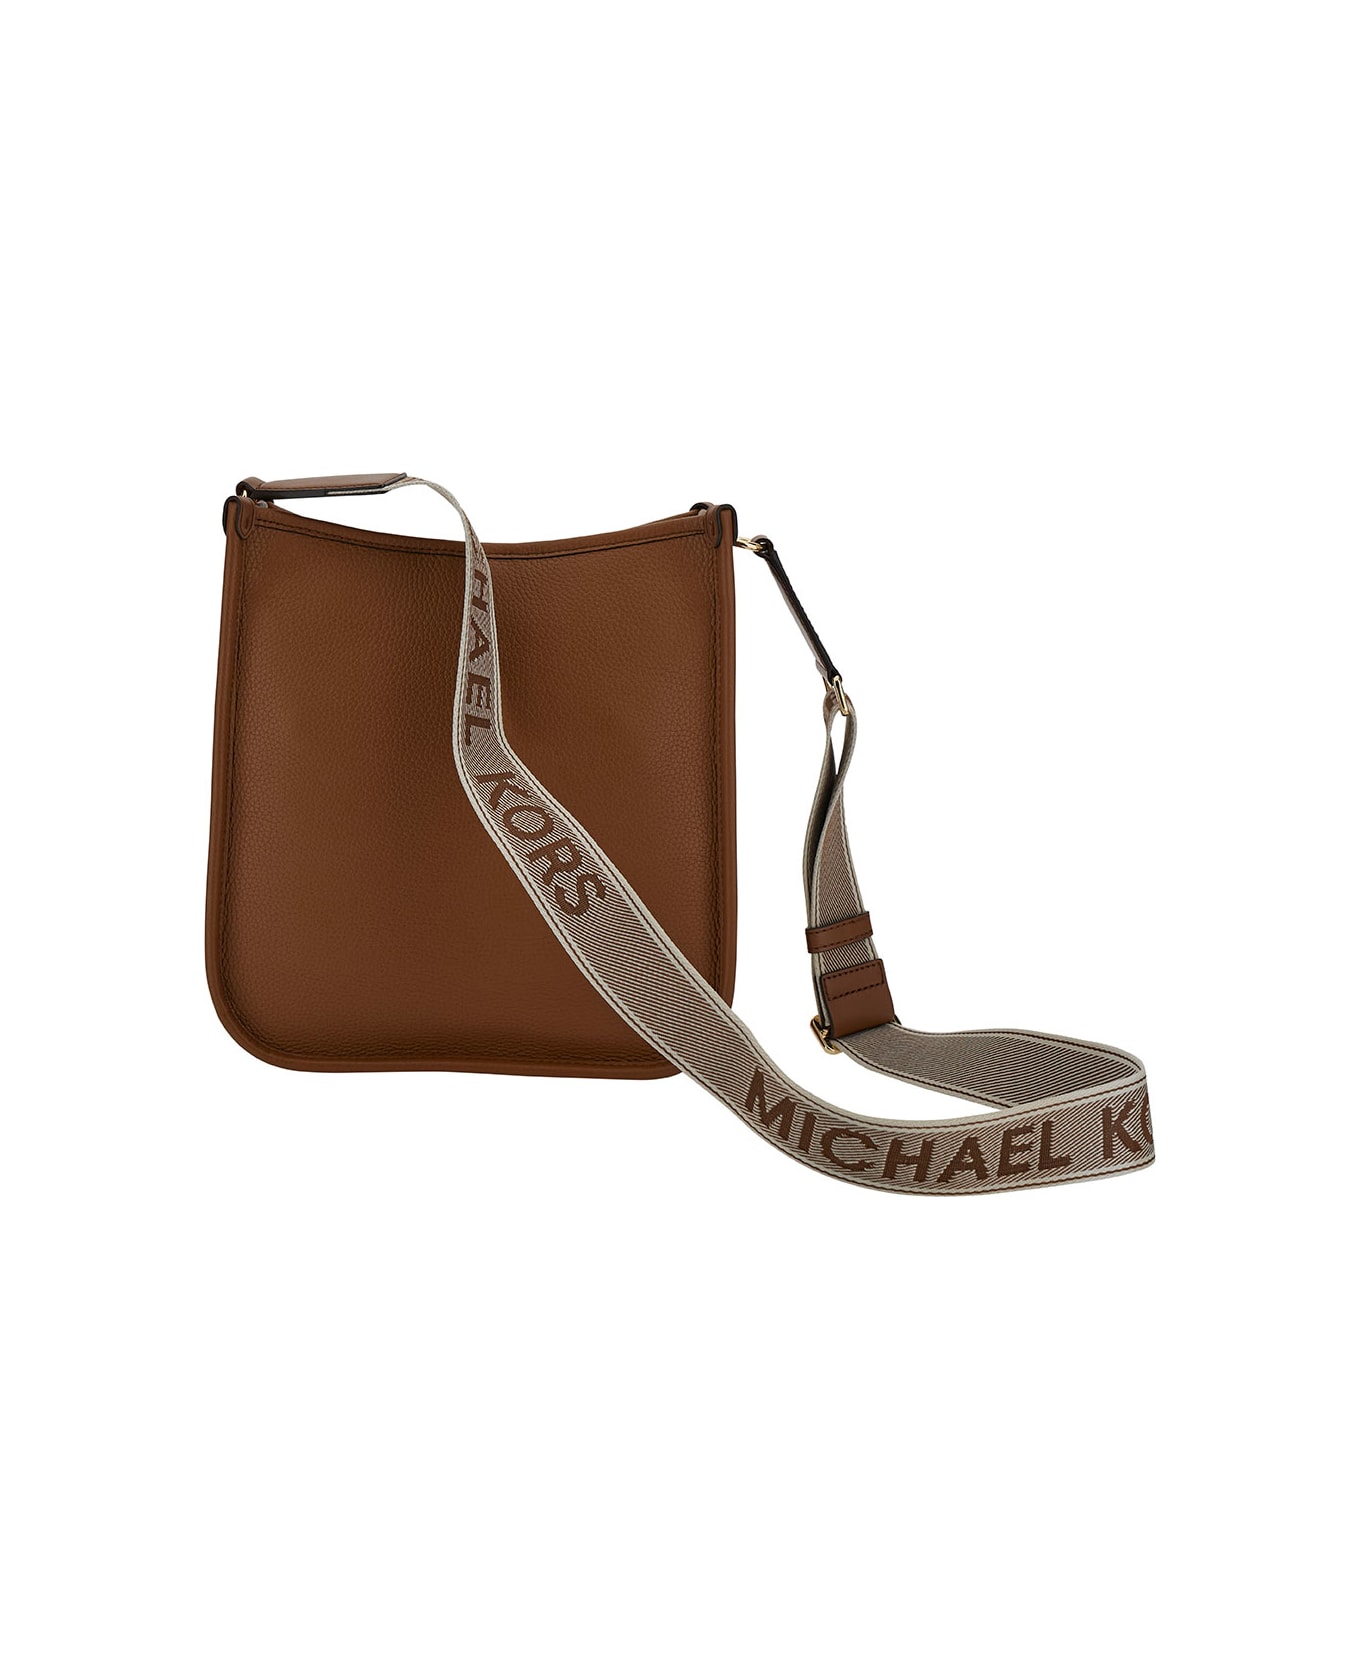 MICHAEL Michael Kors Brown Crossbody Bag With Mk Logo Detail In Hammered Leather Woman - Beige